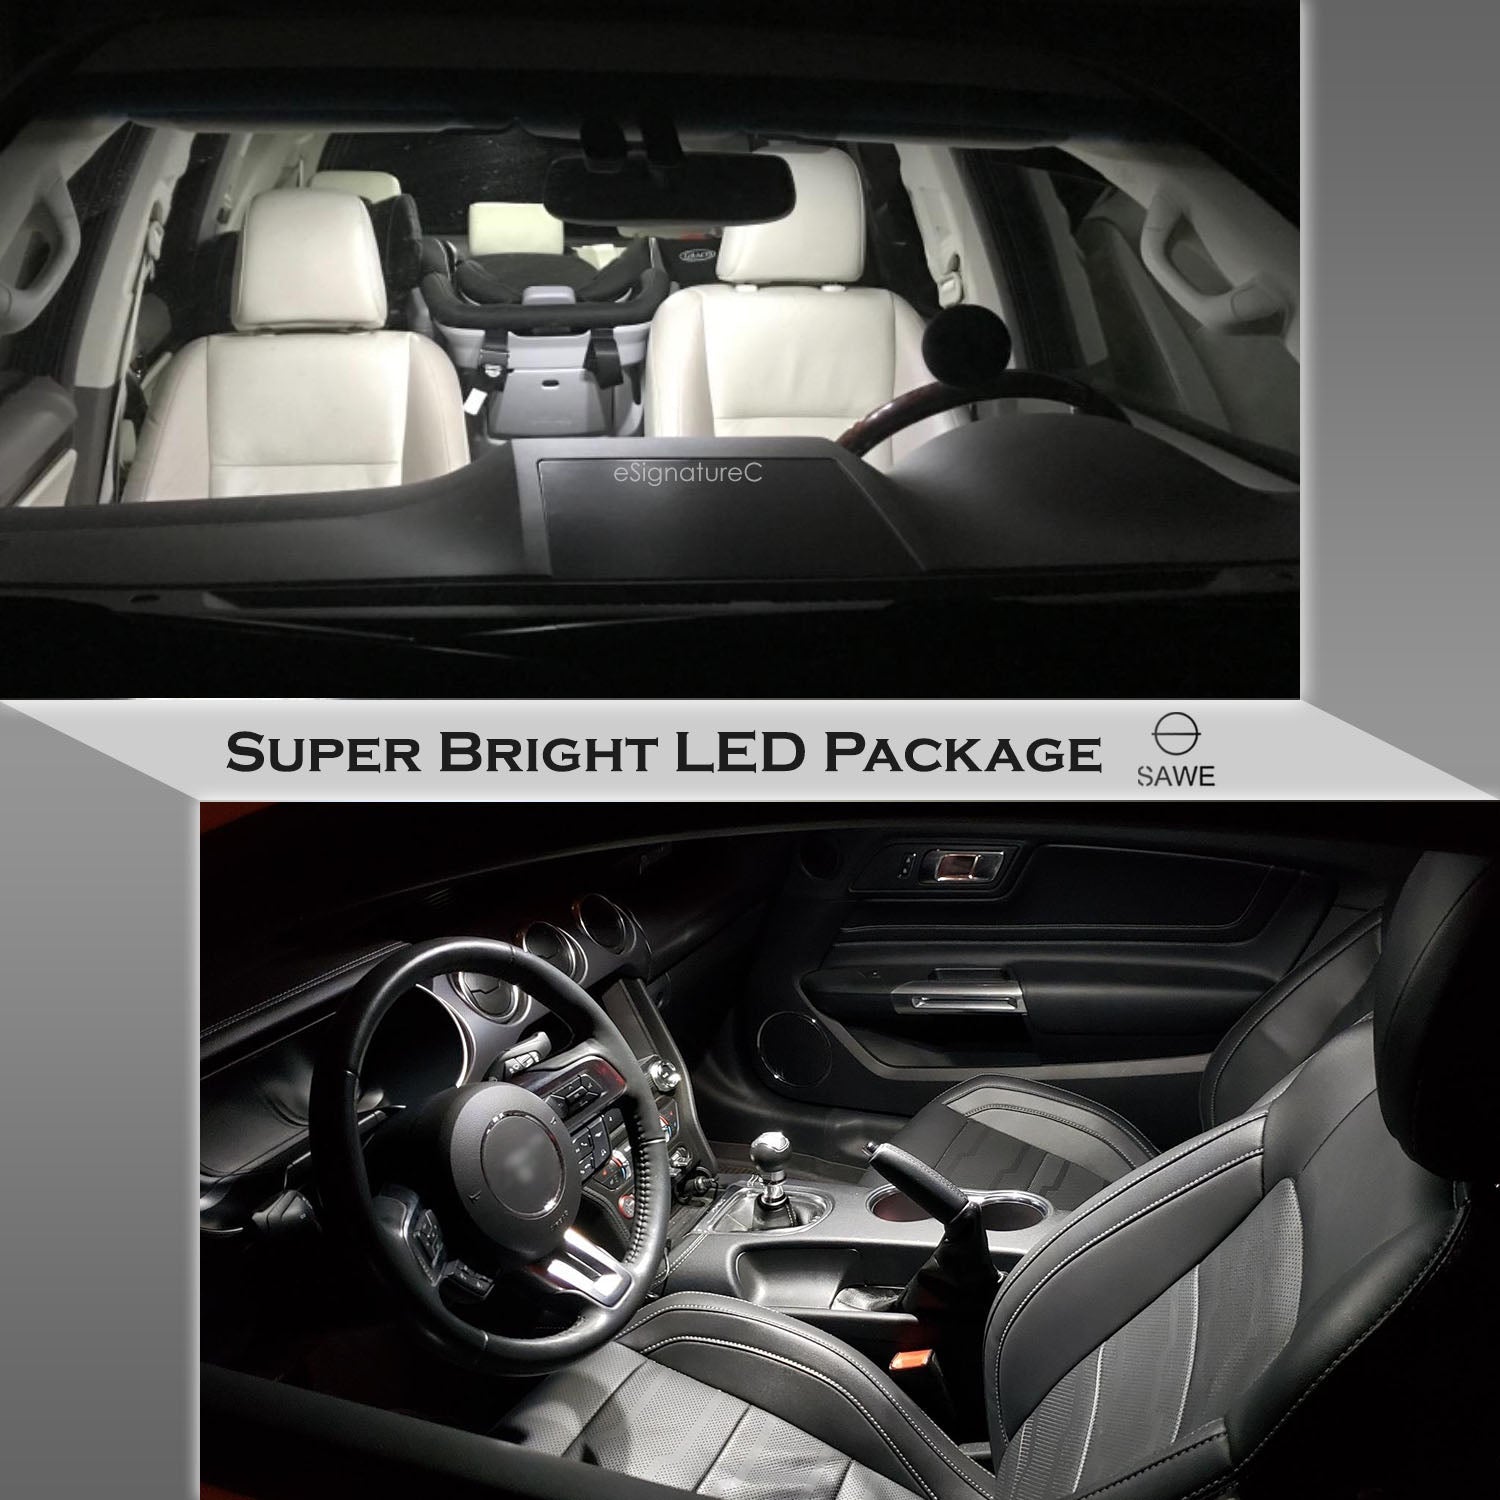 For Lexus GS300 GS400 GS430 Interior LED Lights - Dome & Map Light Bulbs Package Kit for 1998 - 2005 - White